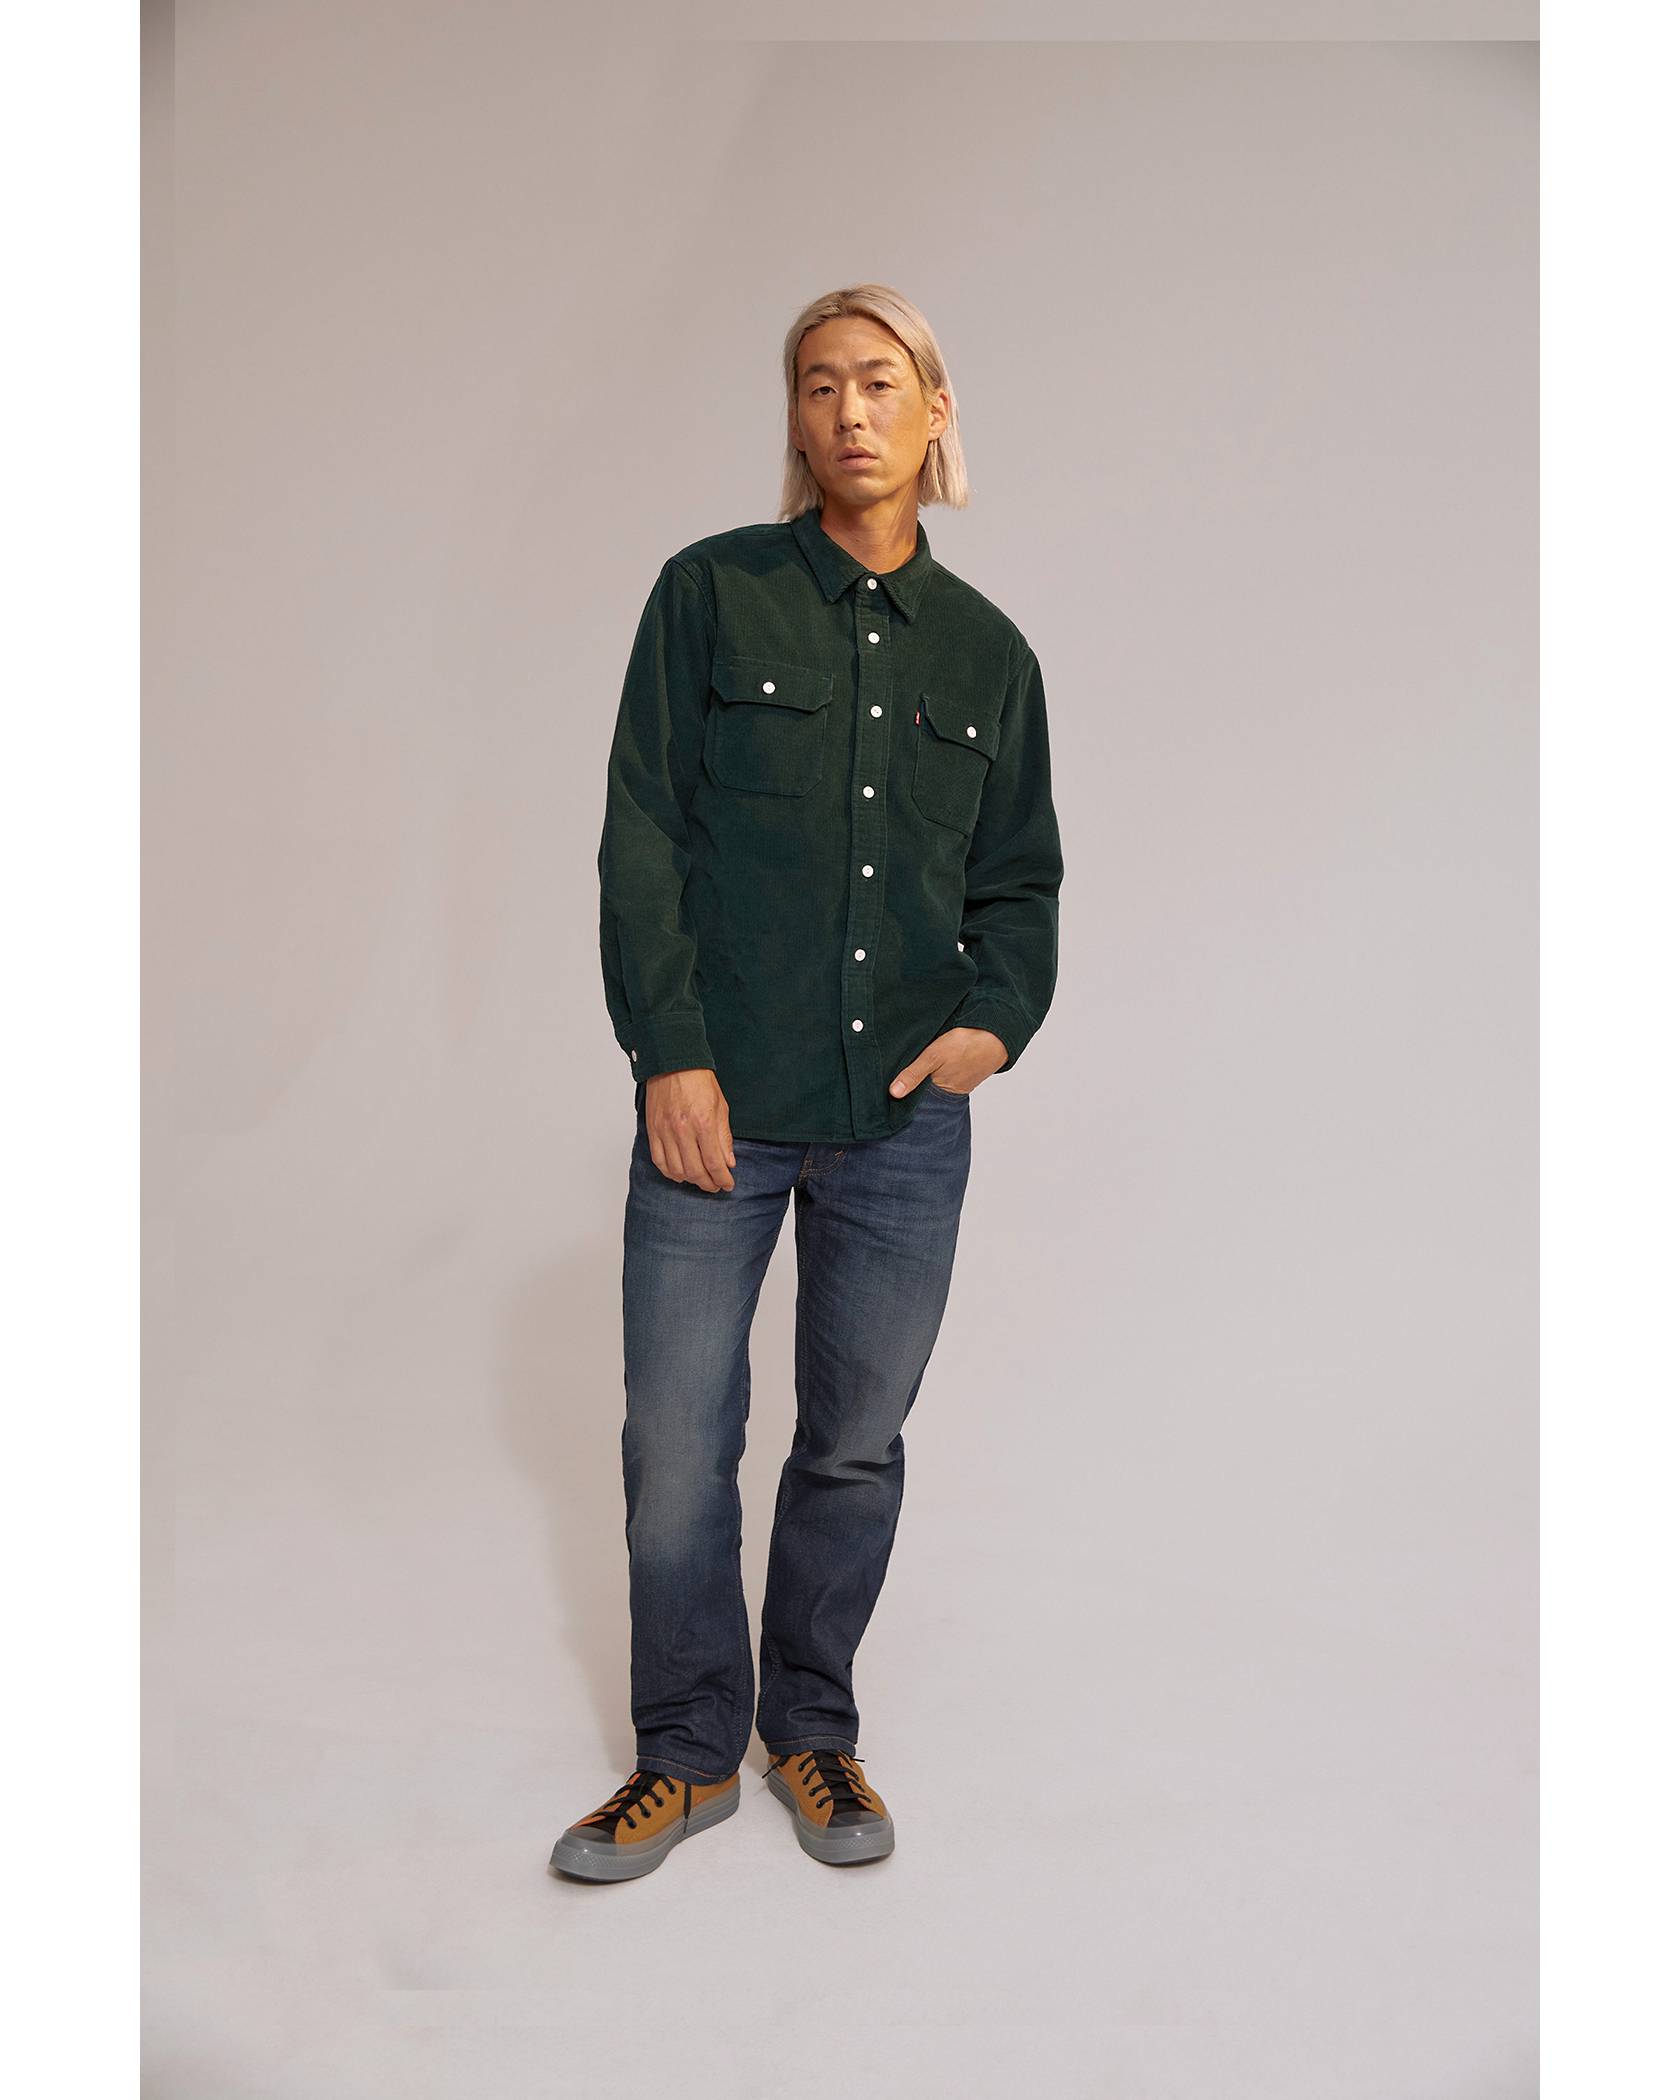 Model wearing green button down and dark wash jeans